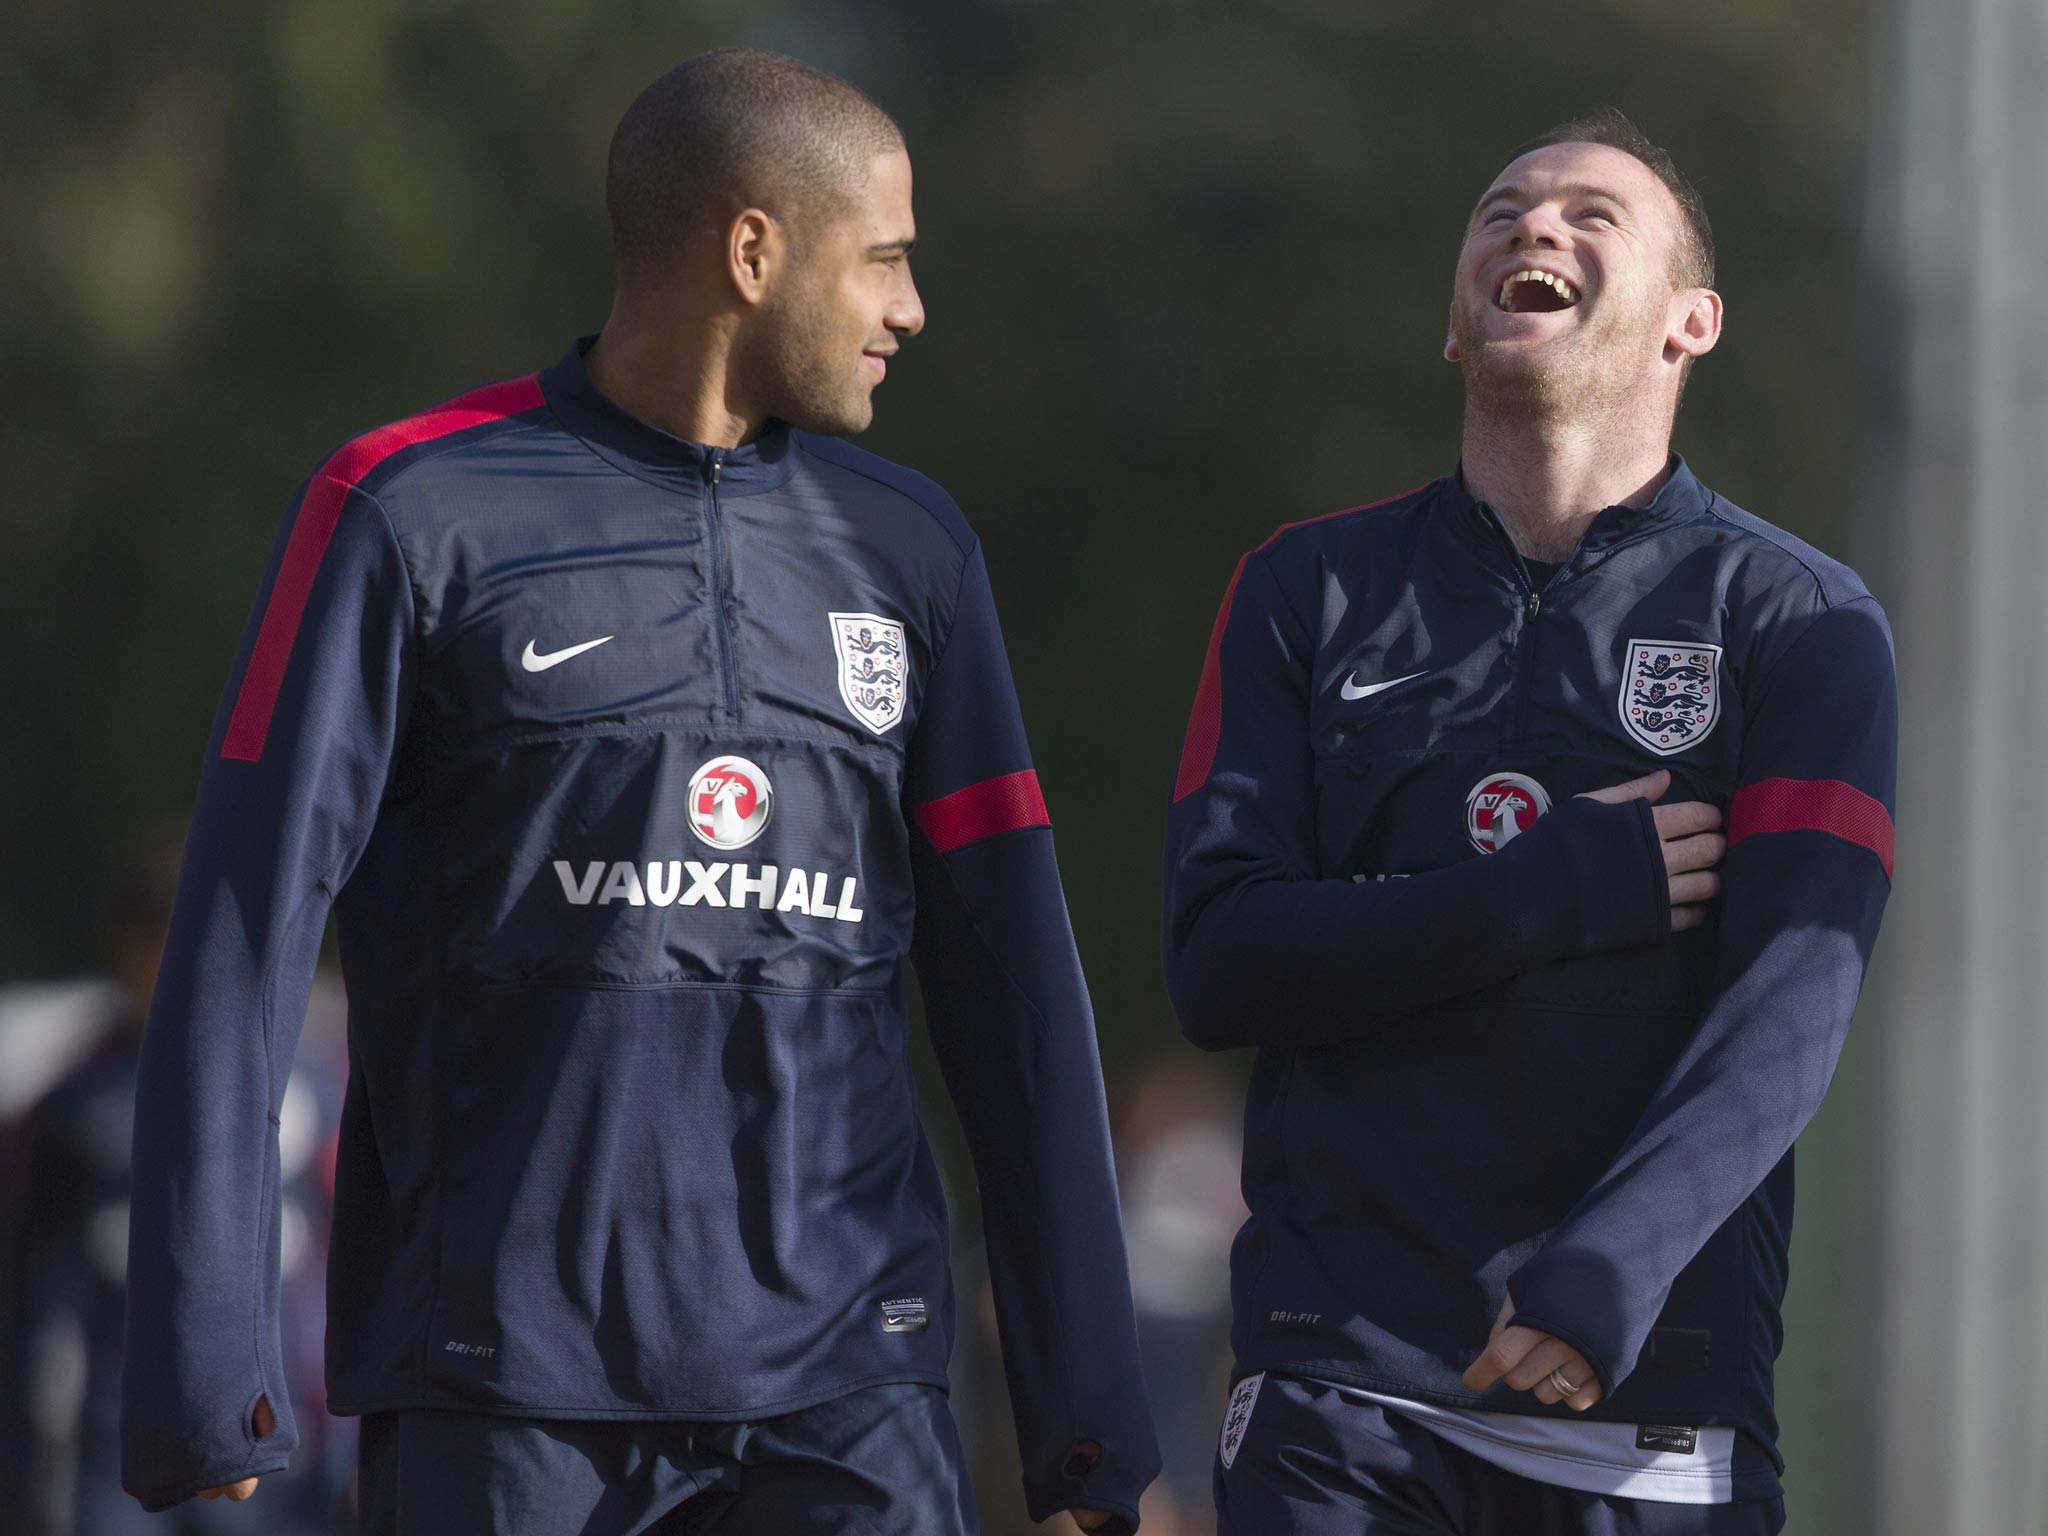 England footballers Glen Johnson (L) and Wayne Rooney (R) share a light moment as they arrive for a training session at Arsenal's training ground